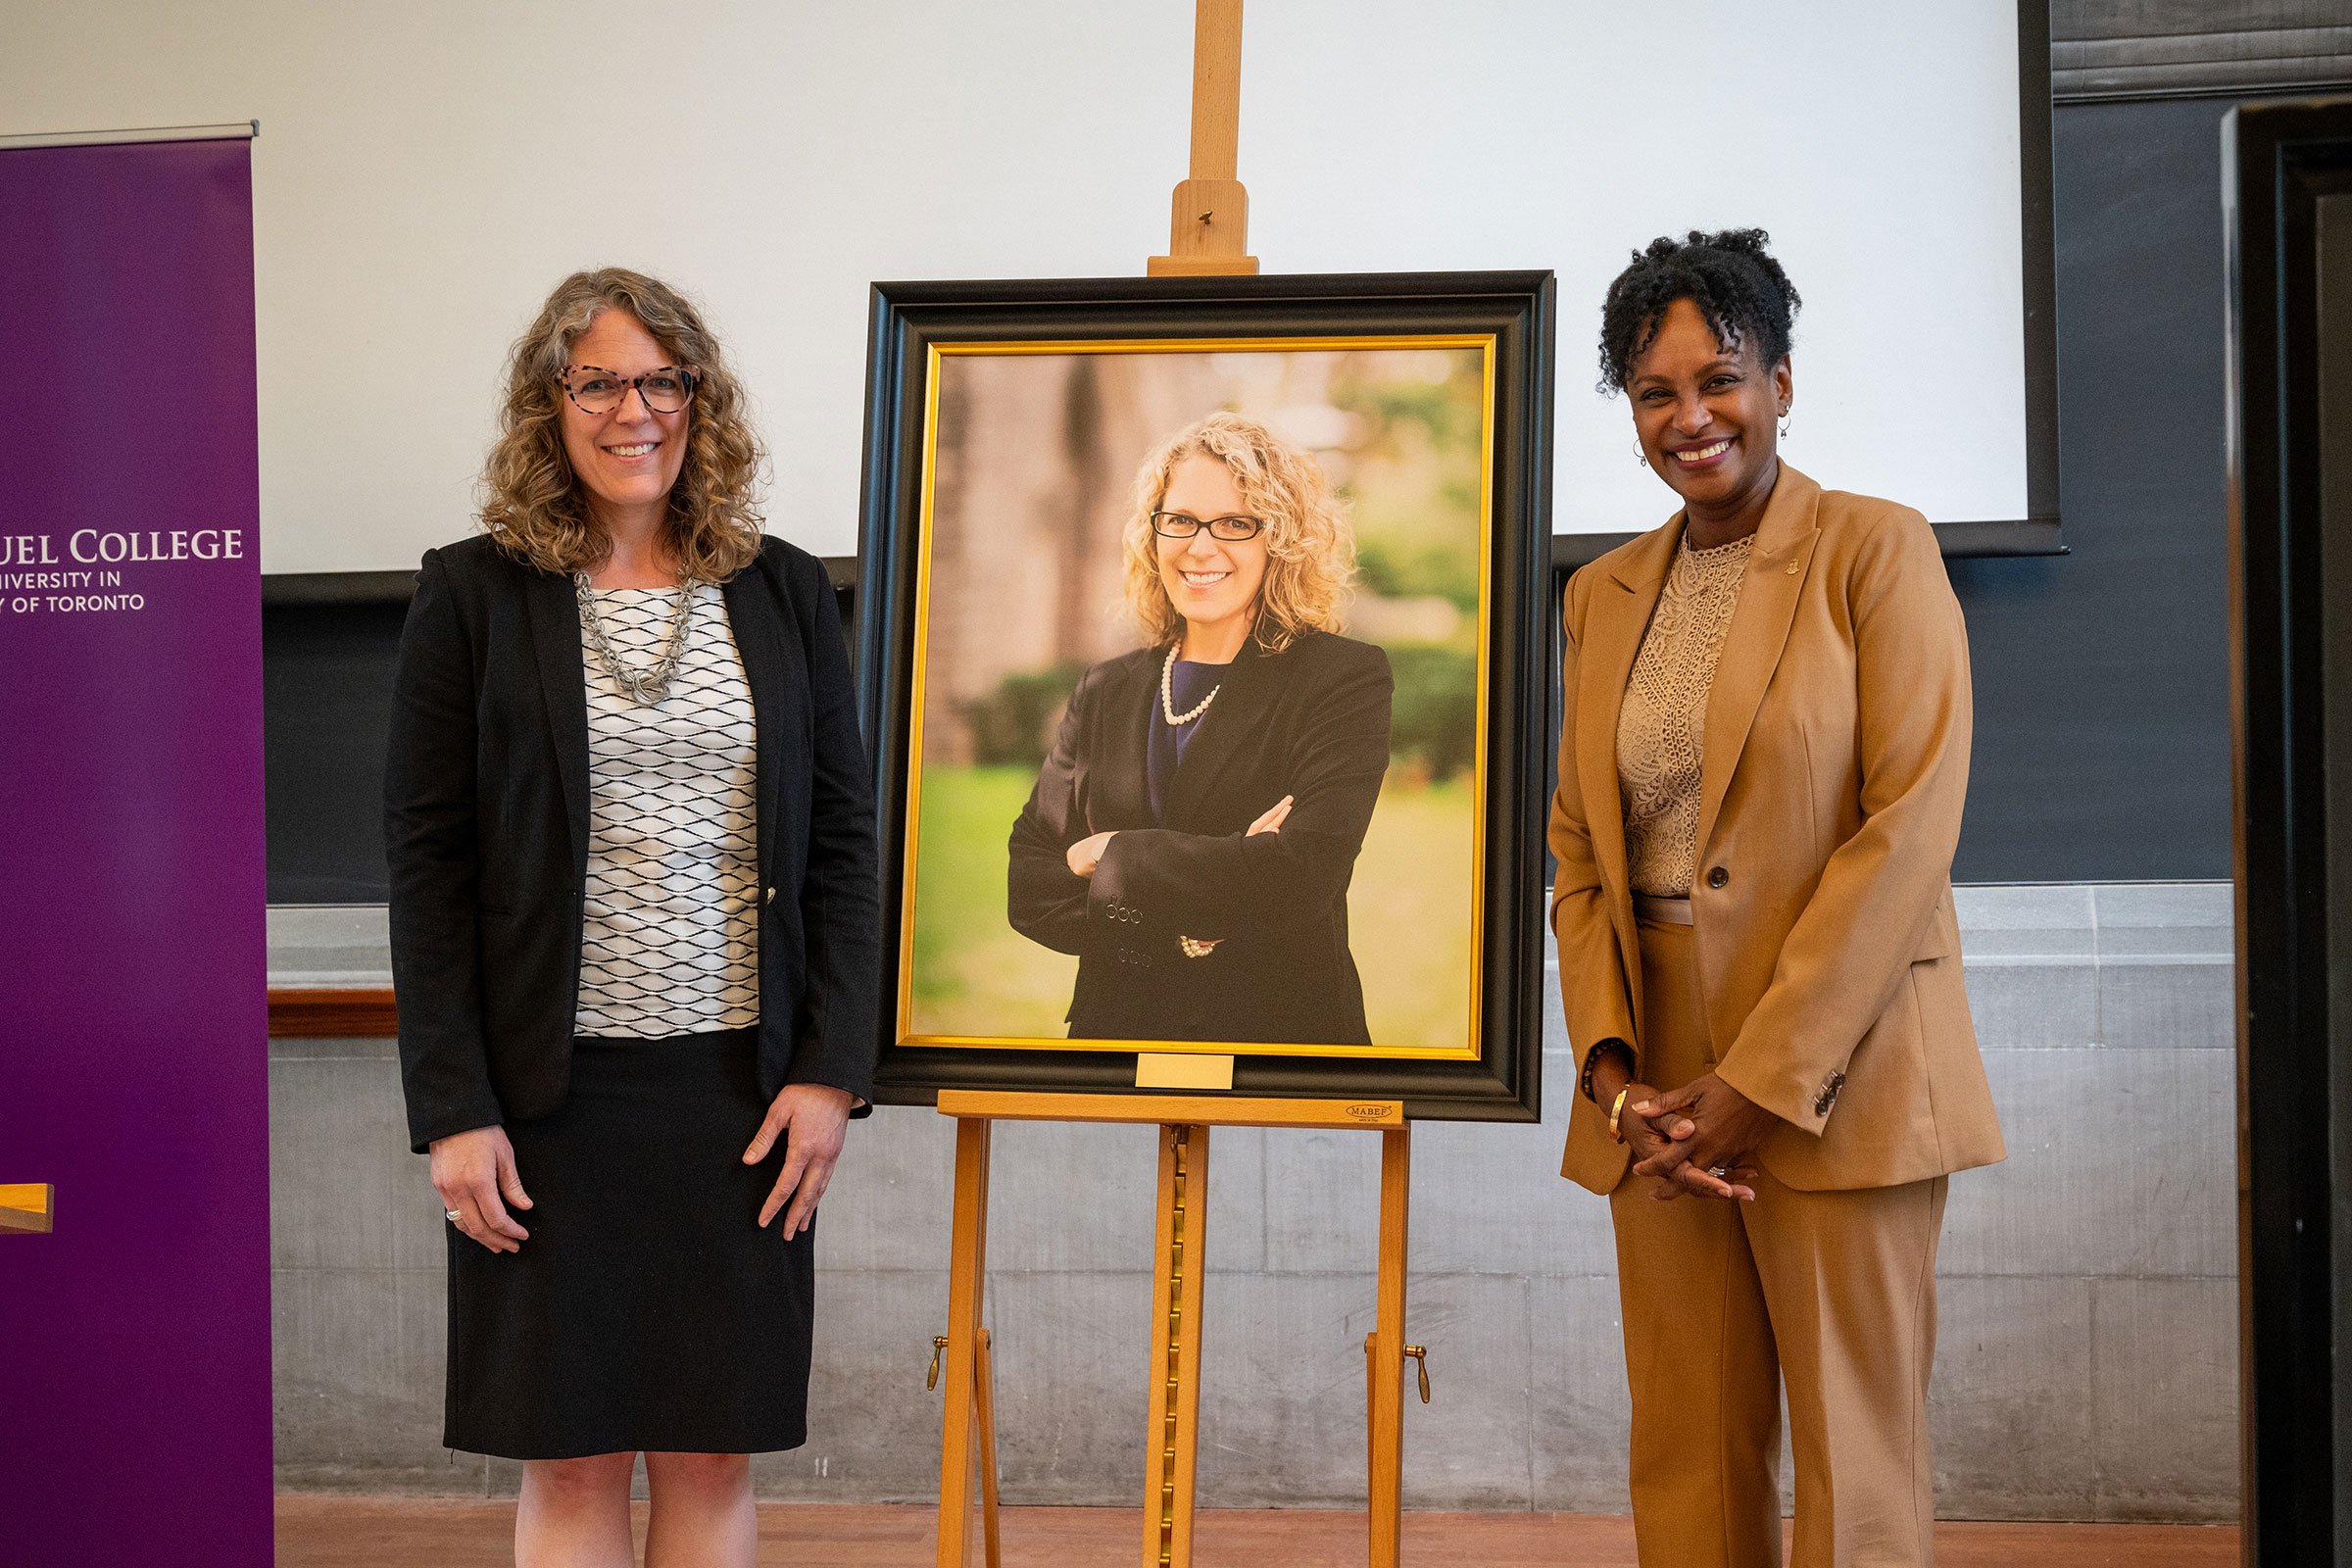 Michelle Voss and Victoria University President Rhonda N. McEwen stand on either side of a portrait of Michelle Voss.